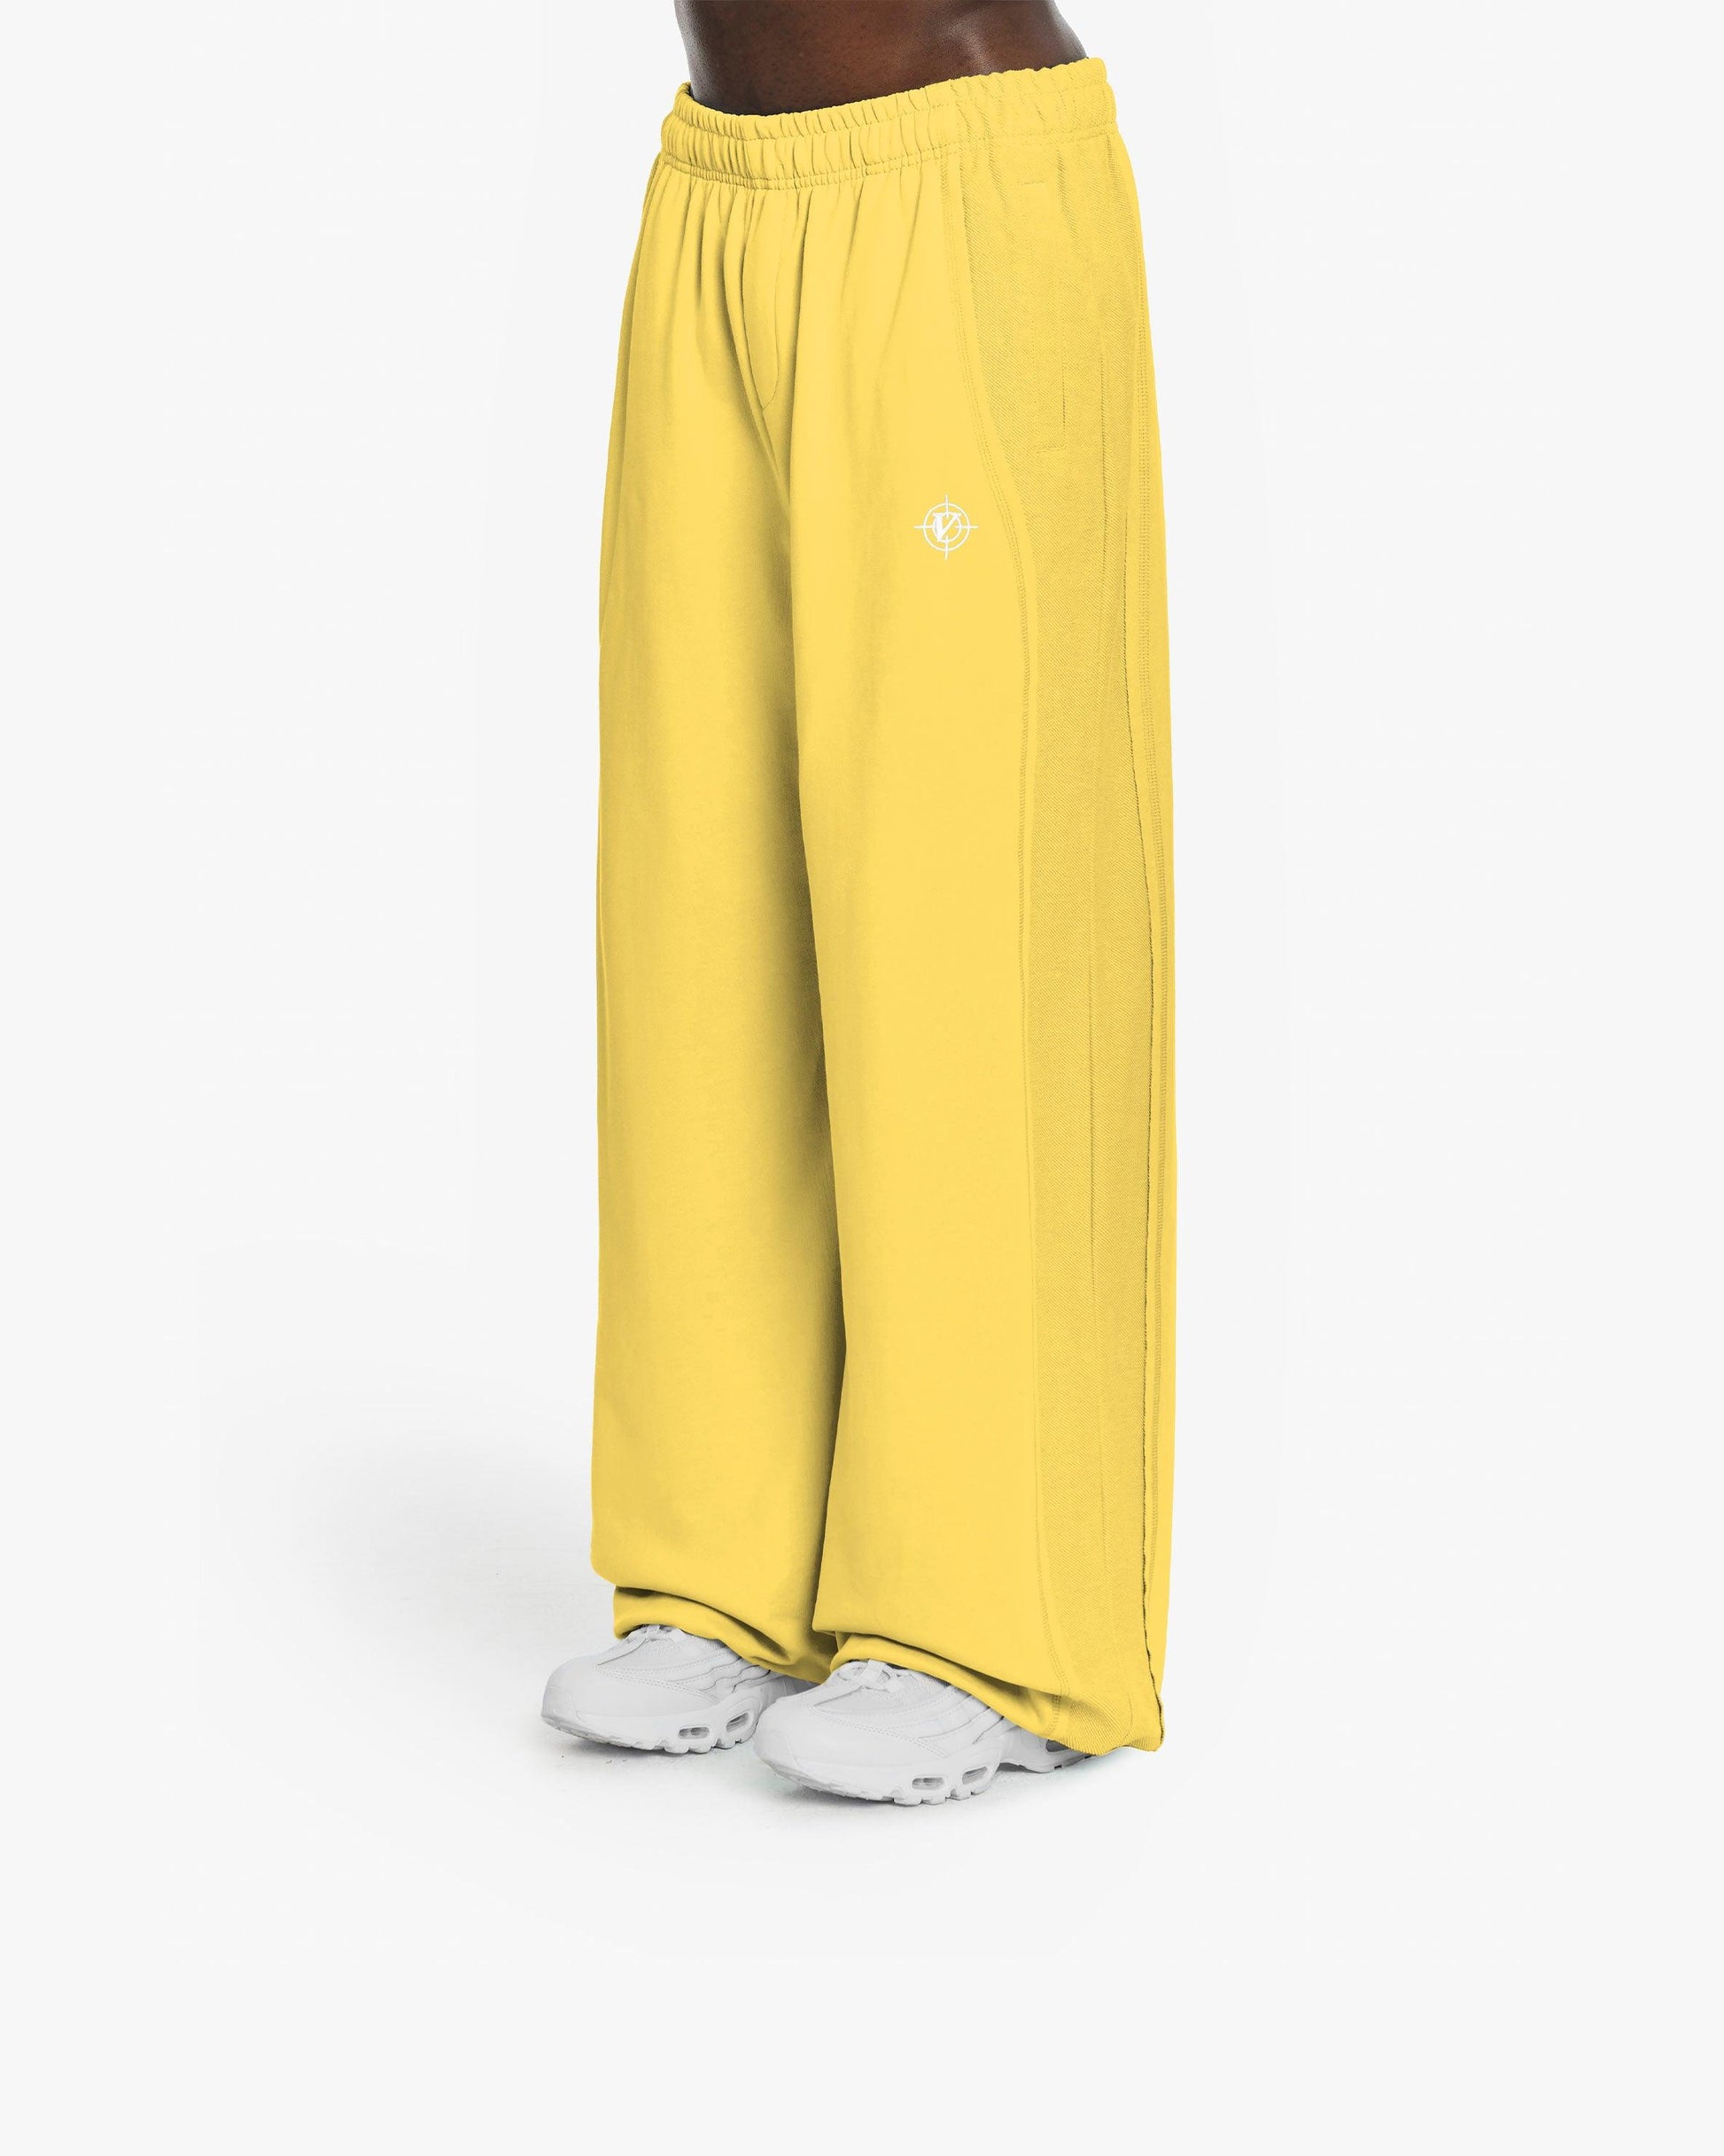 INSIDE OUT JOGGER SUNFLOWER - VICINITY